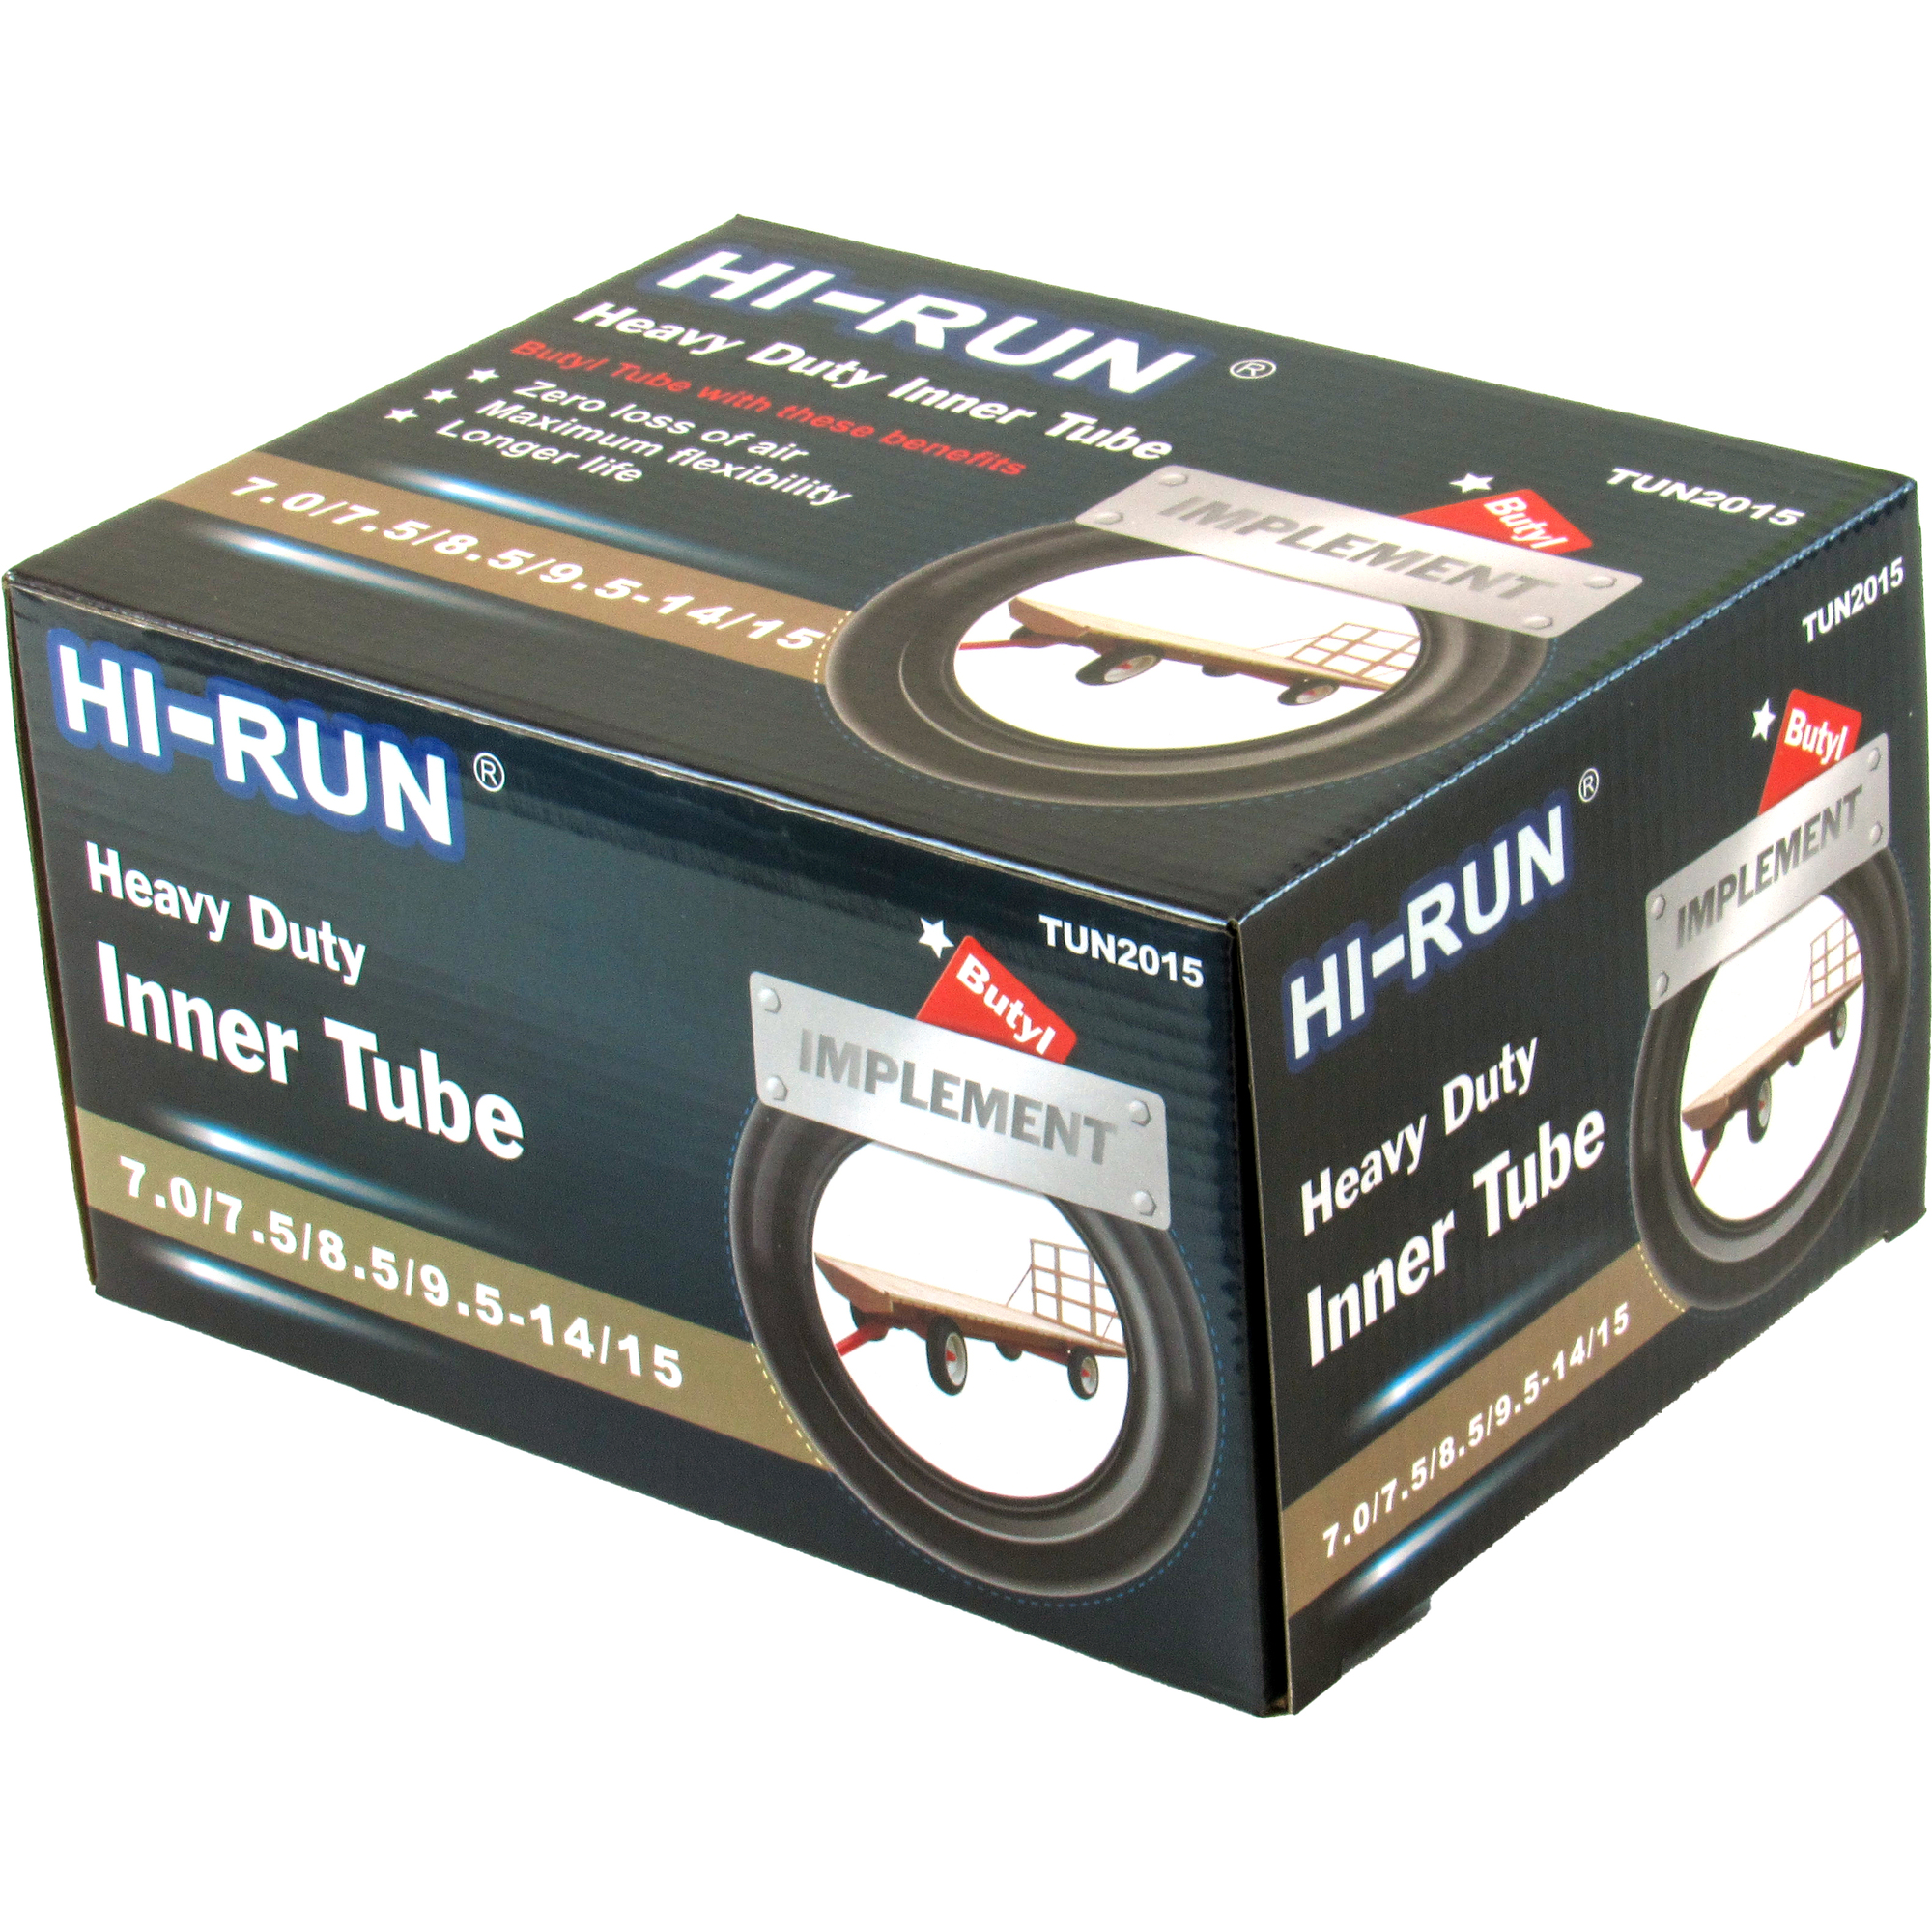 HI-RUN, Tube 7.0/7.5/8.5/9.5-14/15 (TR13) Float Implement, Fits Rim Size 14 in, Included (qty.) 1 Model TUN2015